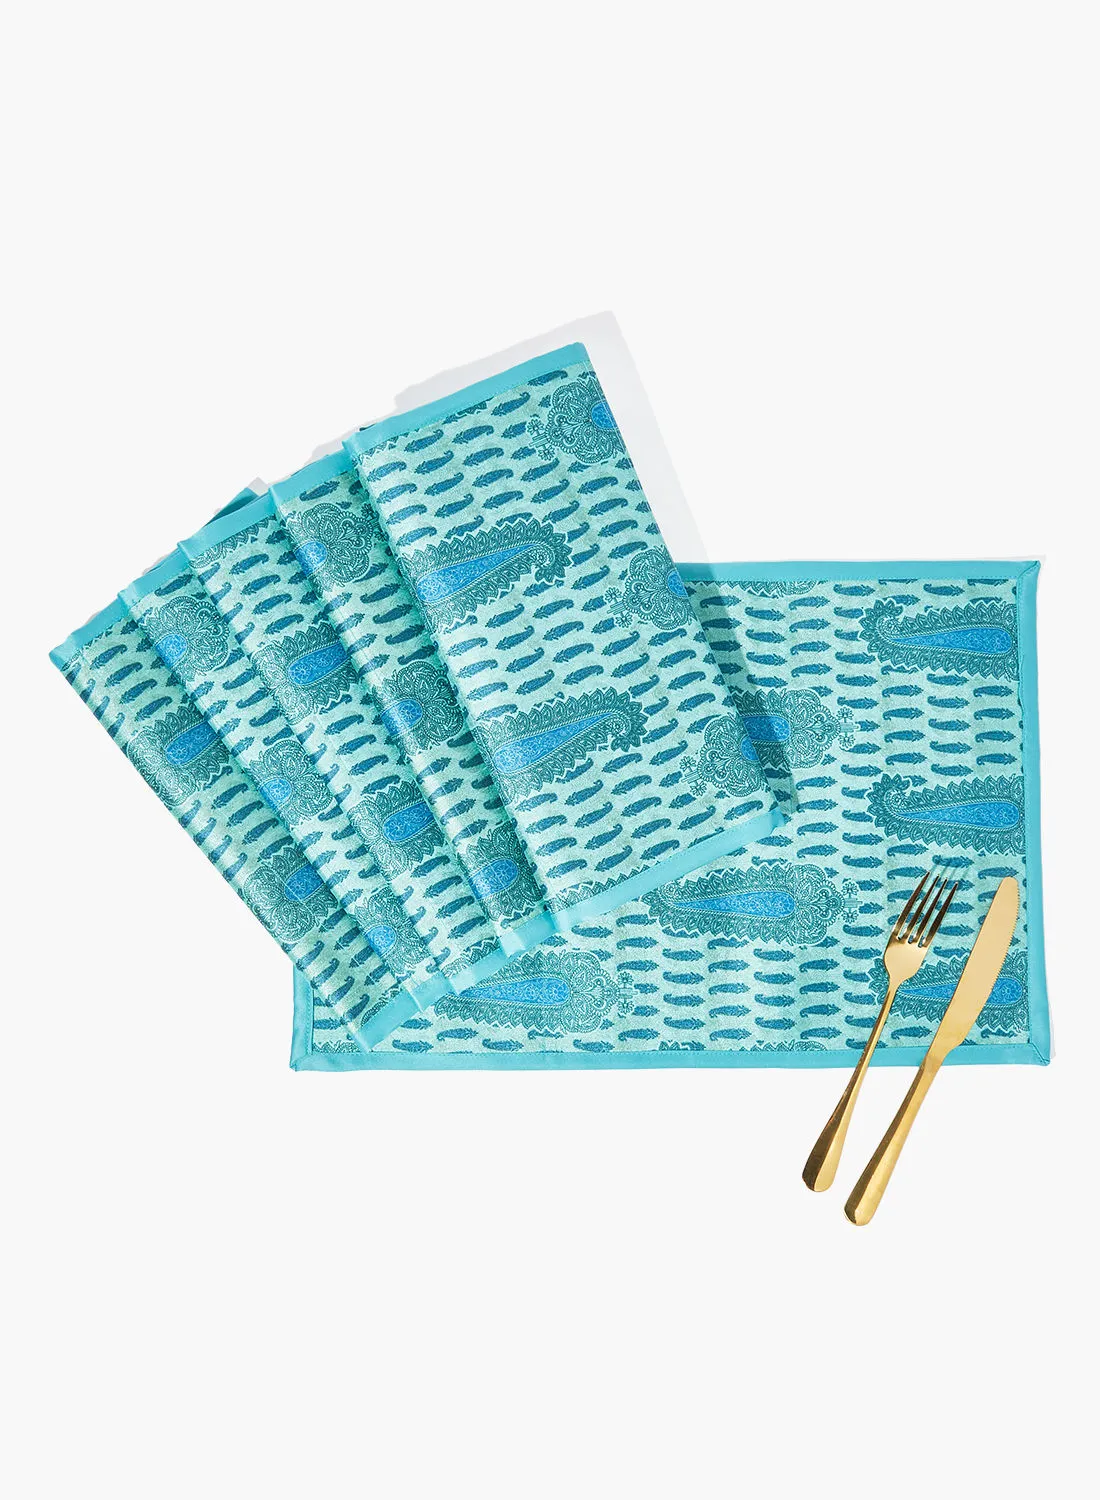 Amal 6 Piece Placemat Set For Dining Table - Washable Dish Pad - Table Mat - Table Linen - Teal Blue